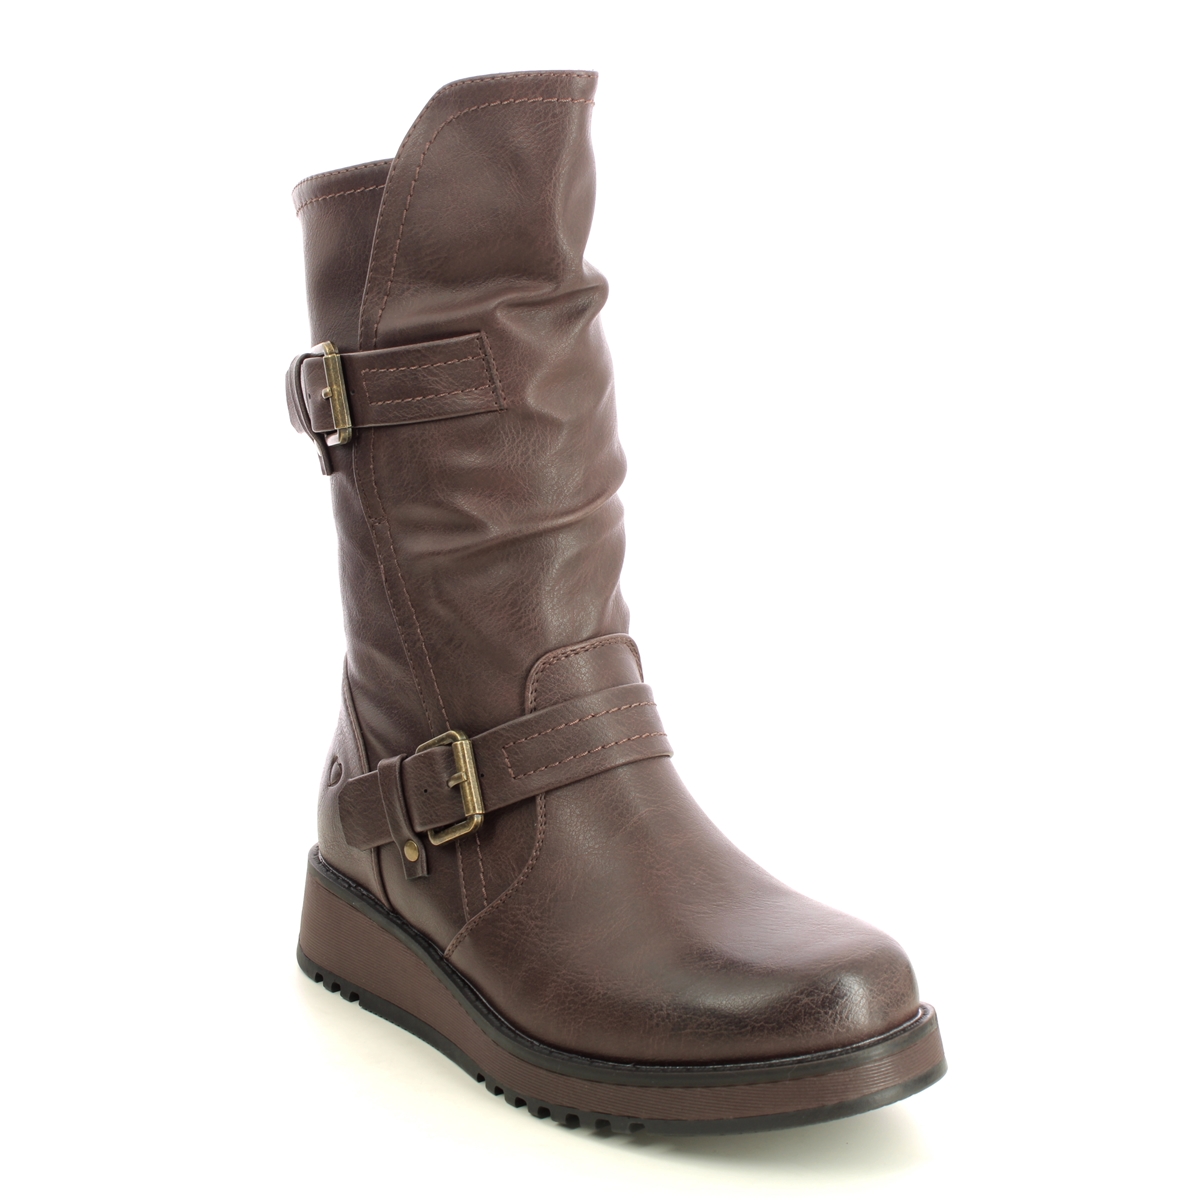 Heavenly Feet Hannah 4 Chocolate brown Womens Mid Calf Boots 3507-27 in a Plain Man-made in Size 7